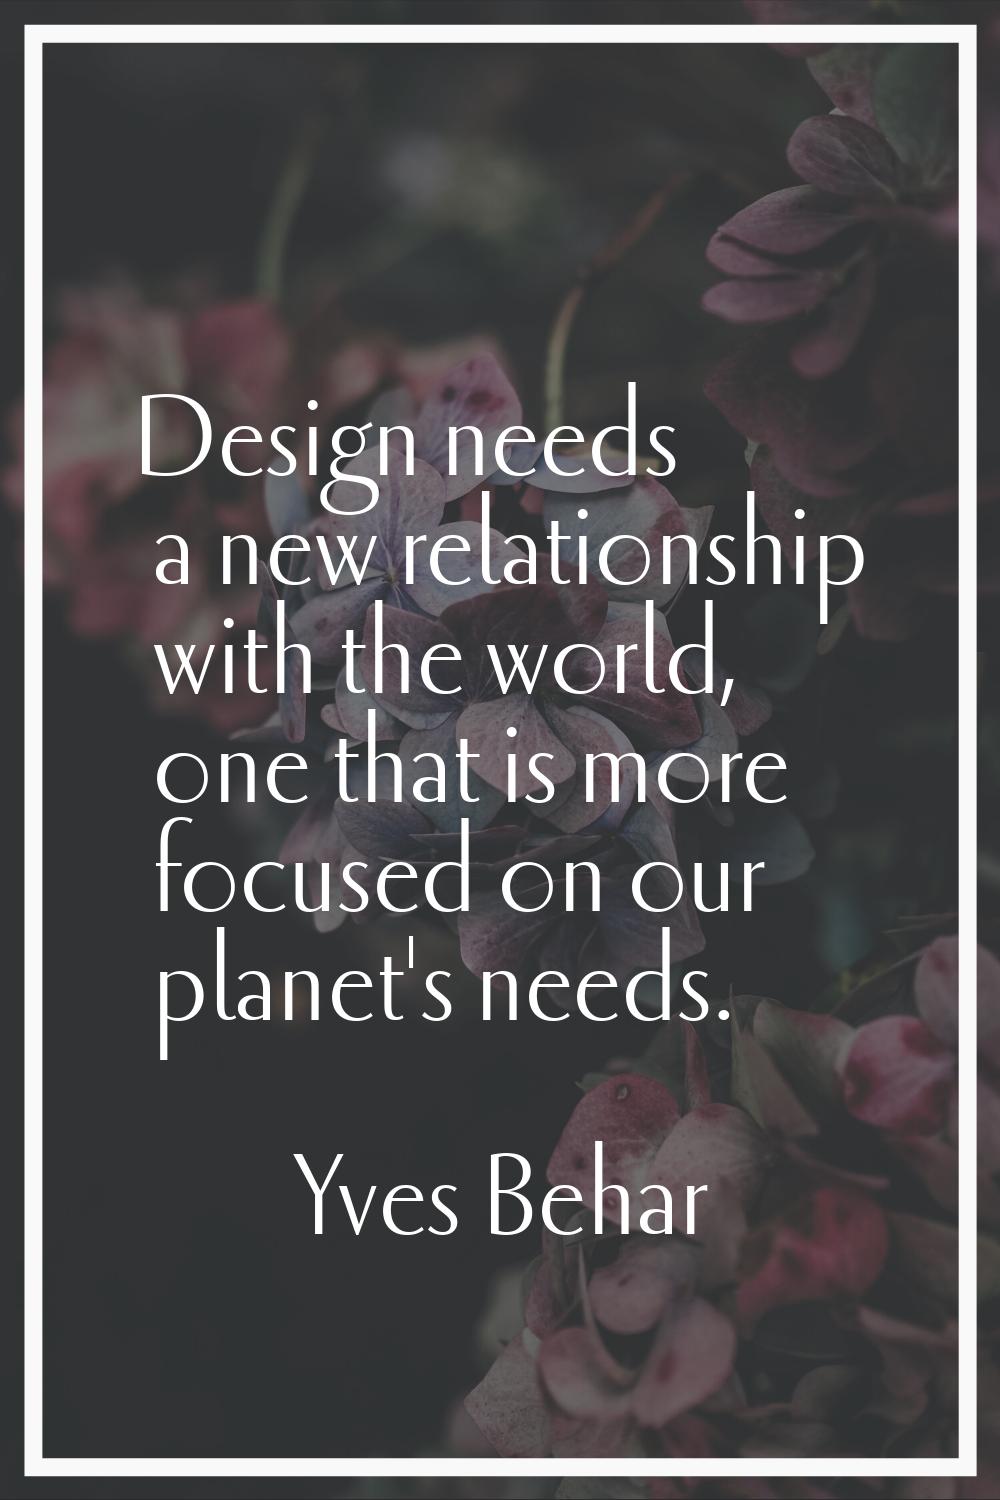 Design needs a new relationship with the world, one that is more focused on our planet's needs.